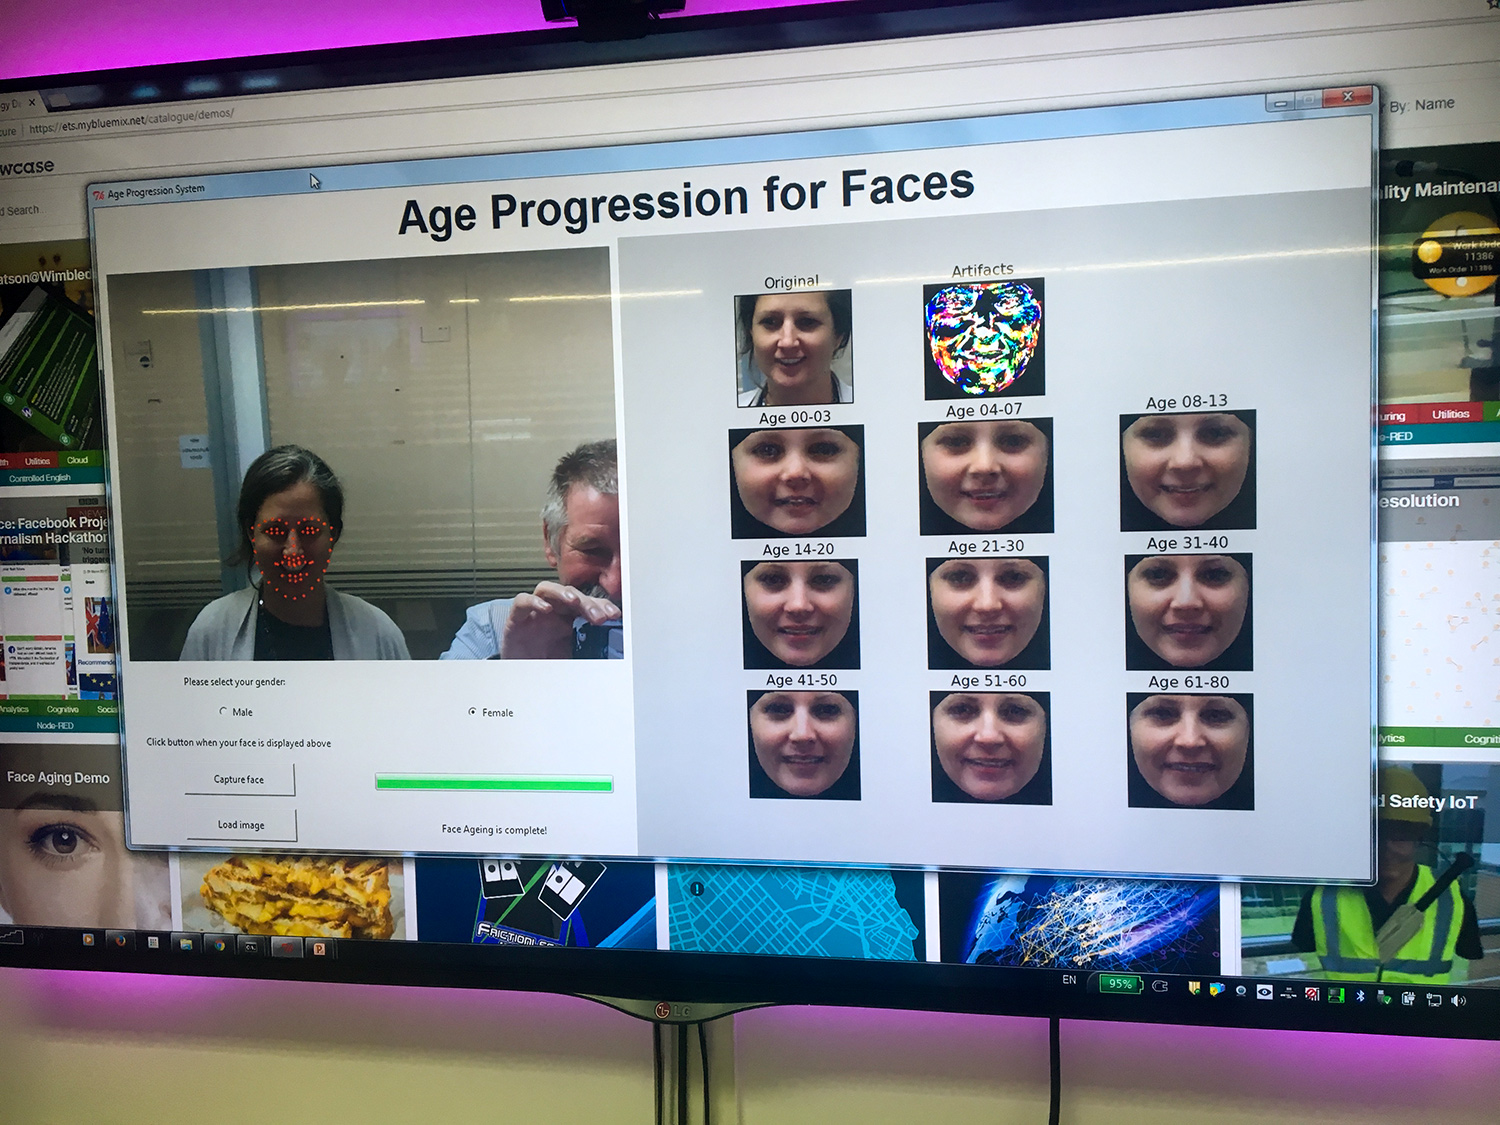 Picture of a computer screen with age progression program open, displaying Susann Keohanes picture and pictoral artifacts and program simulation of her appearance in all of age ranges from 0-3, 4-7, 8-13, 14-20, 21-30, 31-40, 41-50, 51-60, & 61-80.